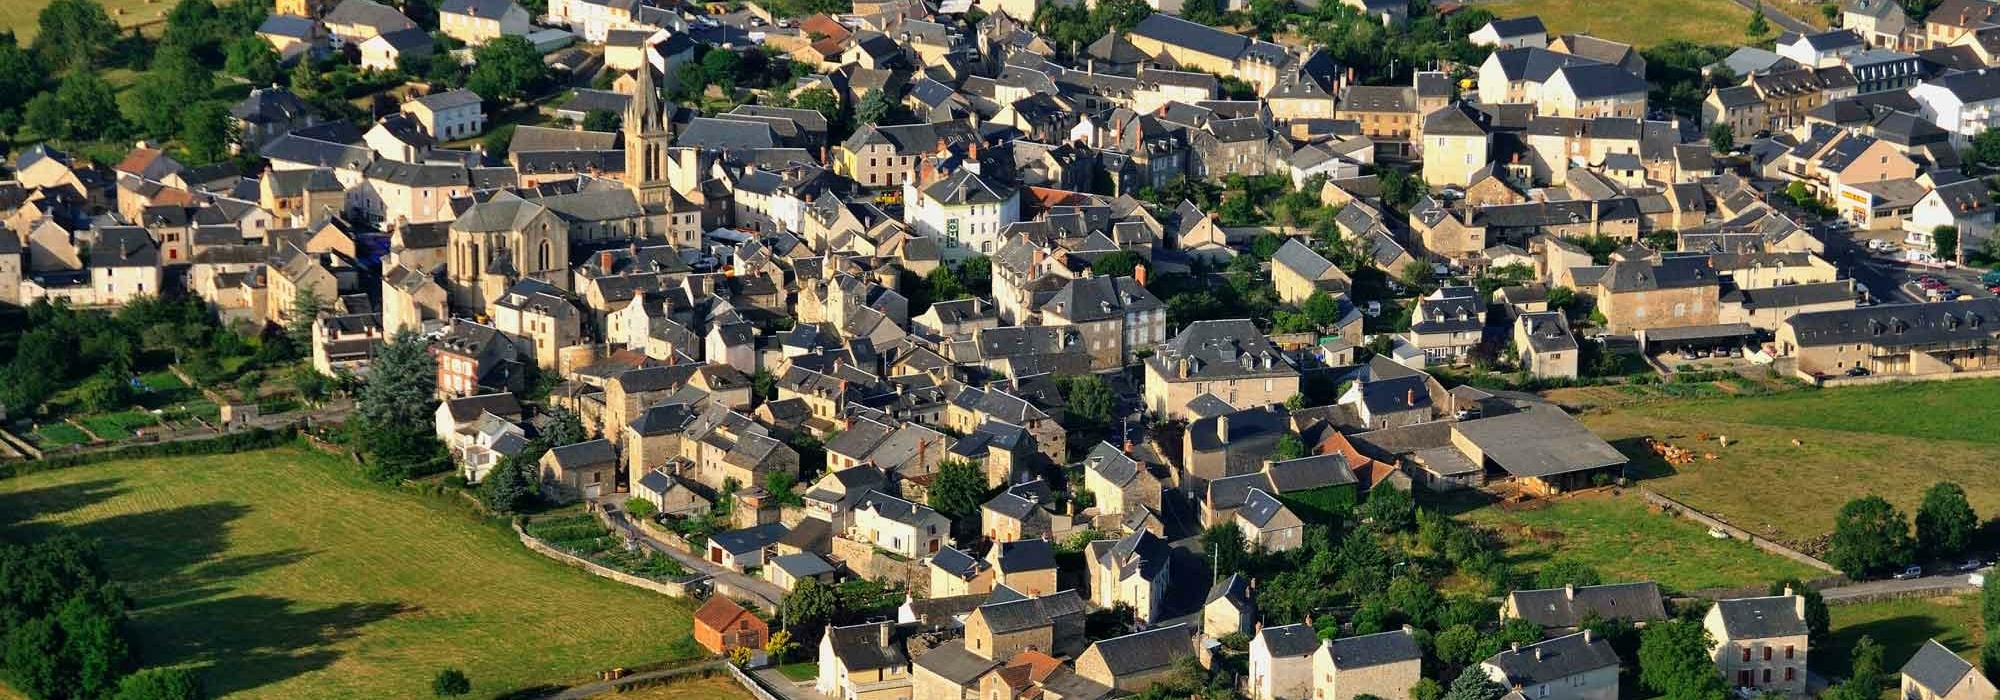 Laissac, a restful and dynamic village in the heart of Aveyron's not-to-miss beautiful sites.